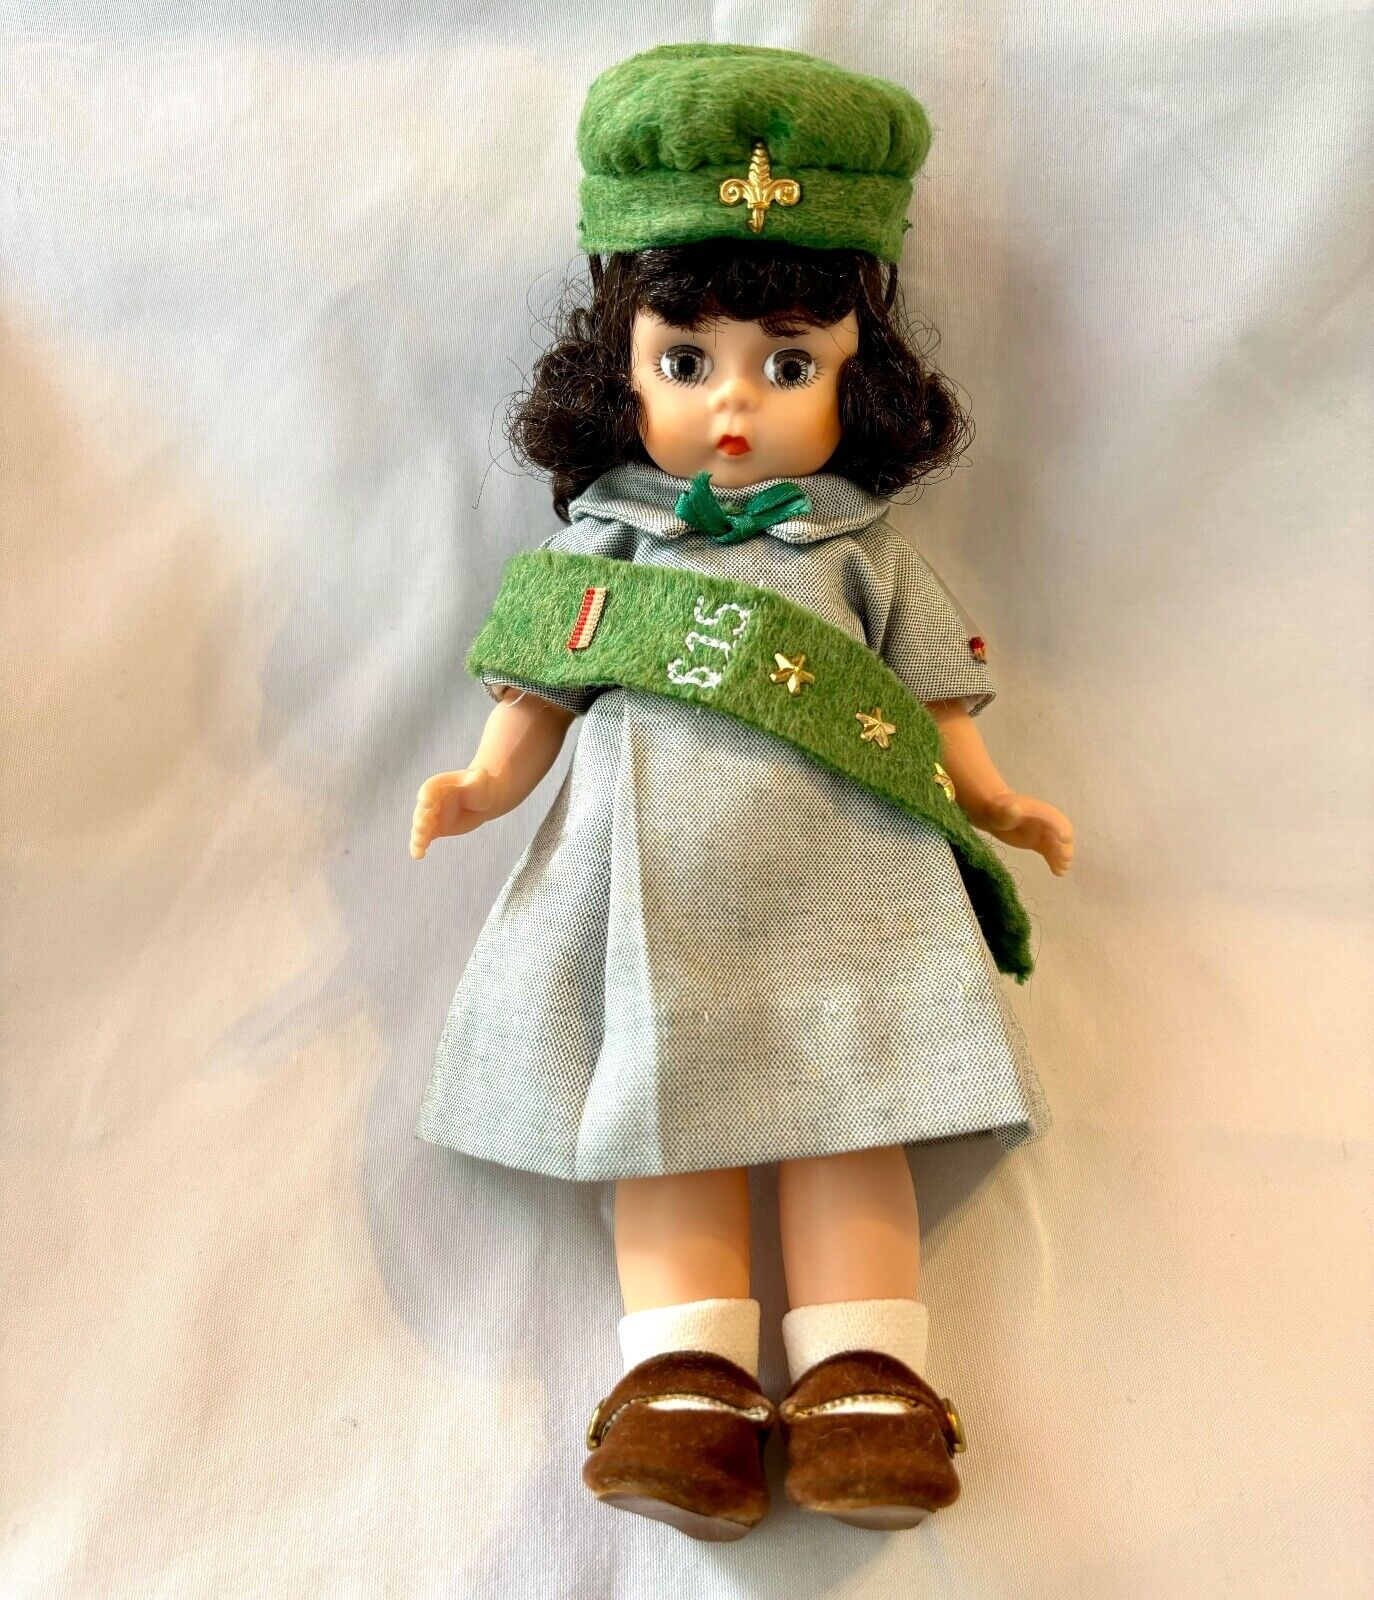 RARE LIMITED EDITION Vintage GIRL SCOUT DOLL MADAME ALEXANDER 1992